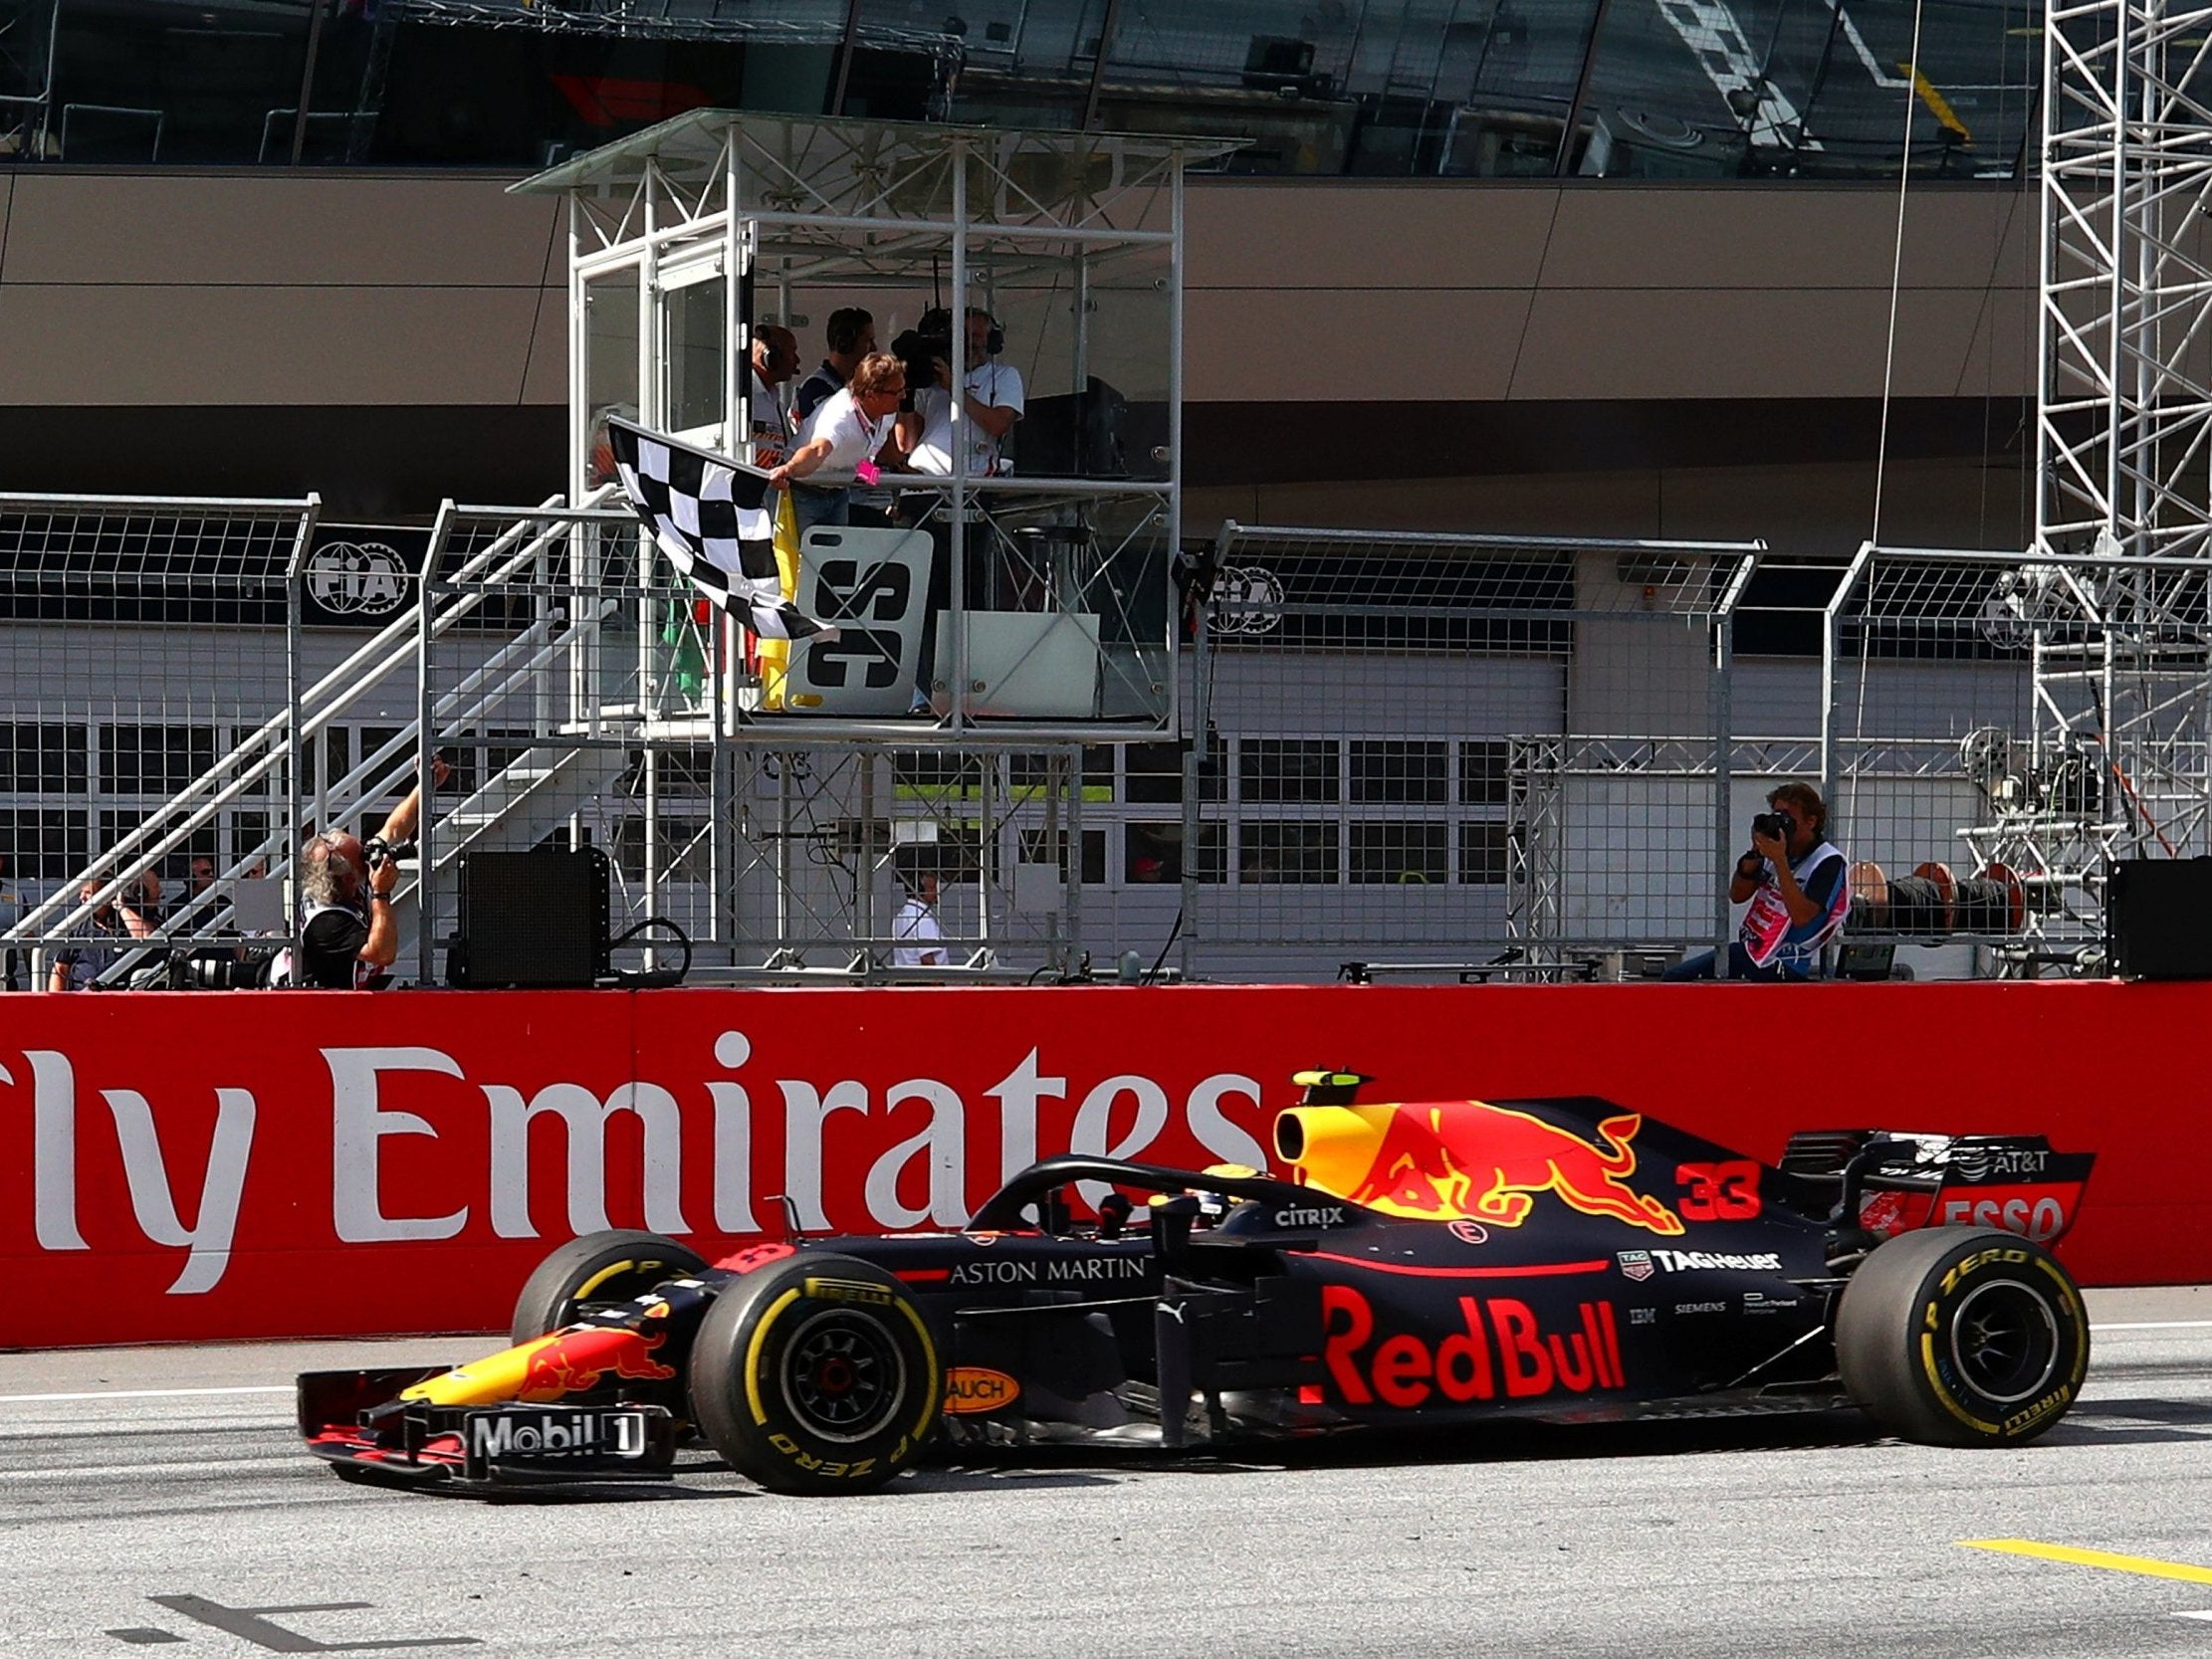 Verstappen takes victory in the Austrian Grand Prix to give Red Bull a home win